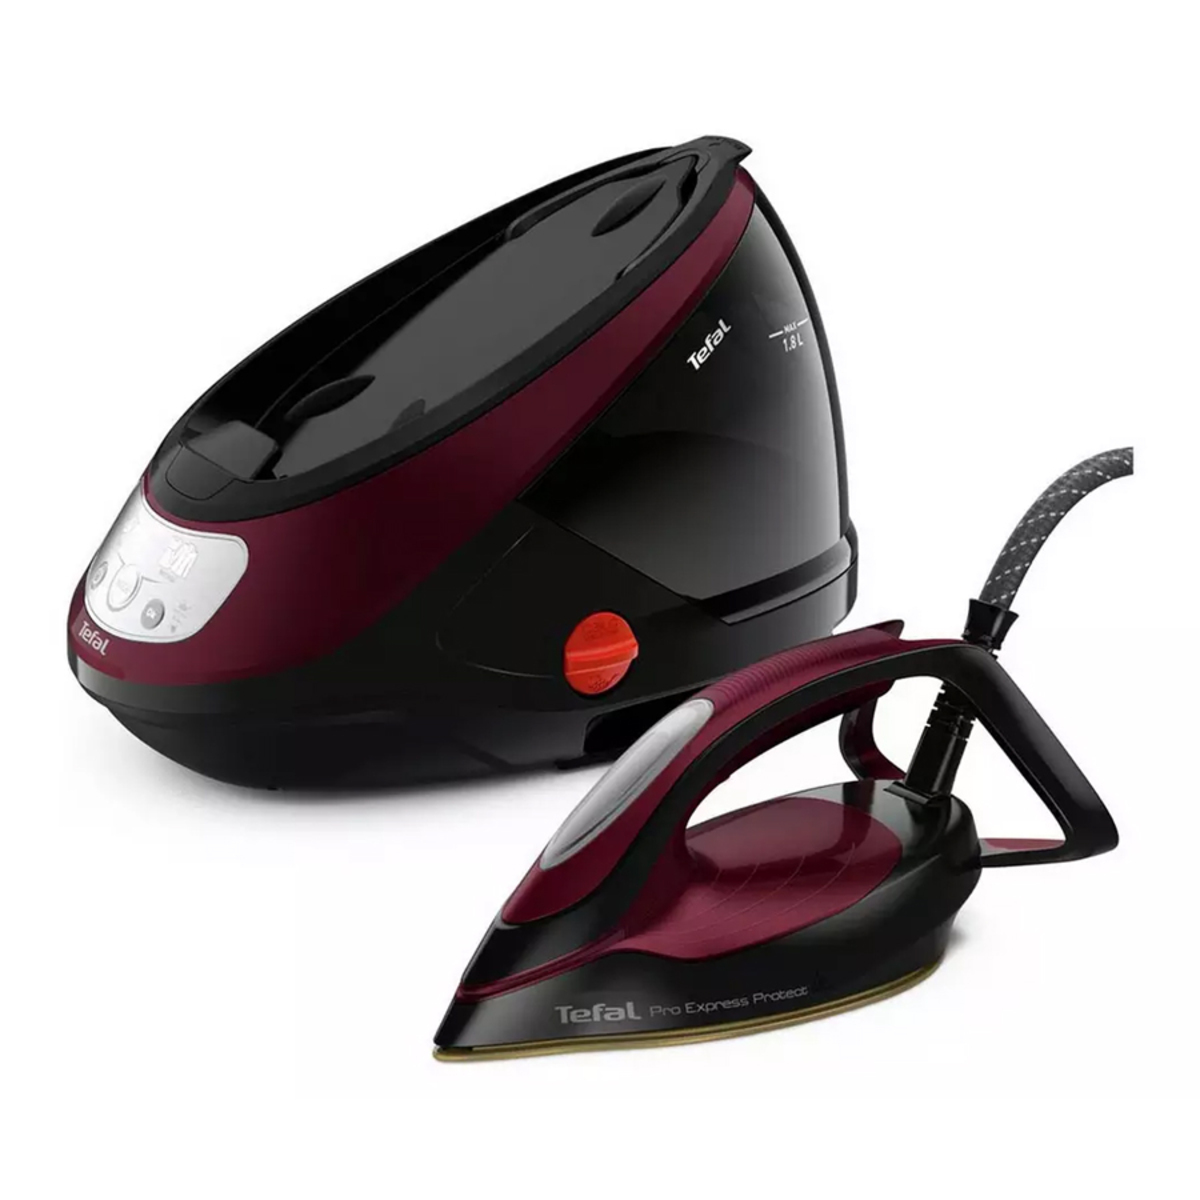 TEFAL GV9230G0 Pro Express Protect Steam Generator Iron